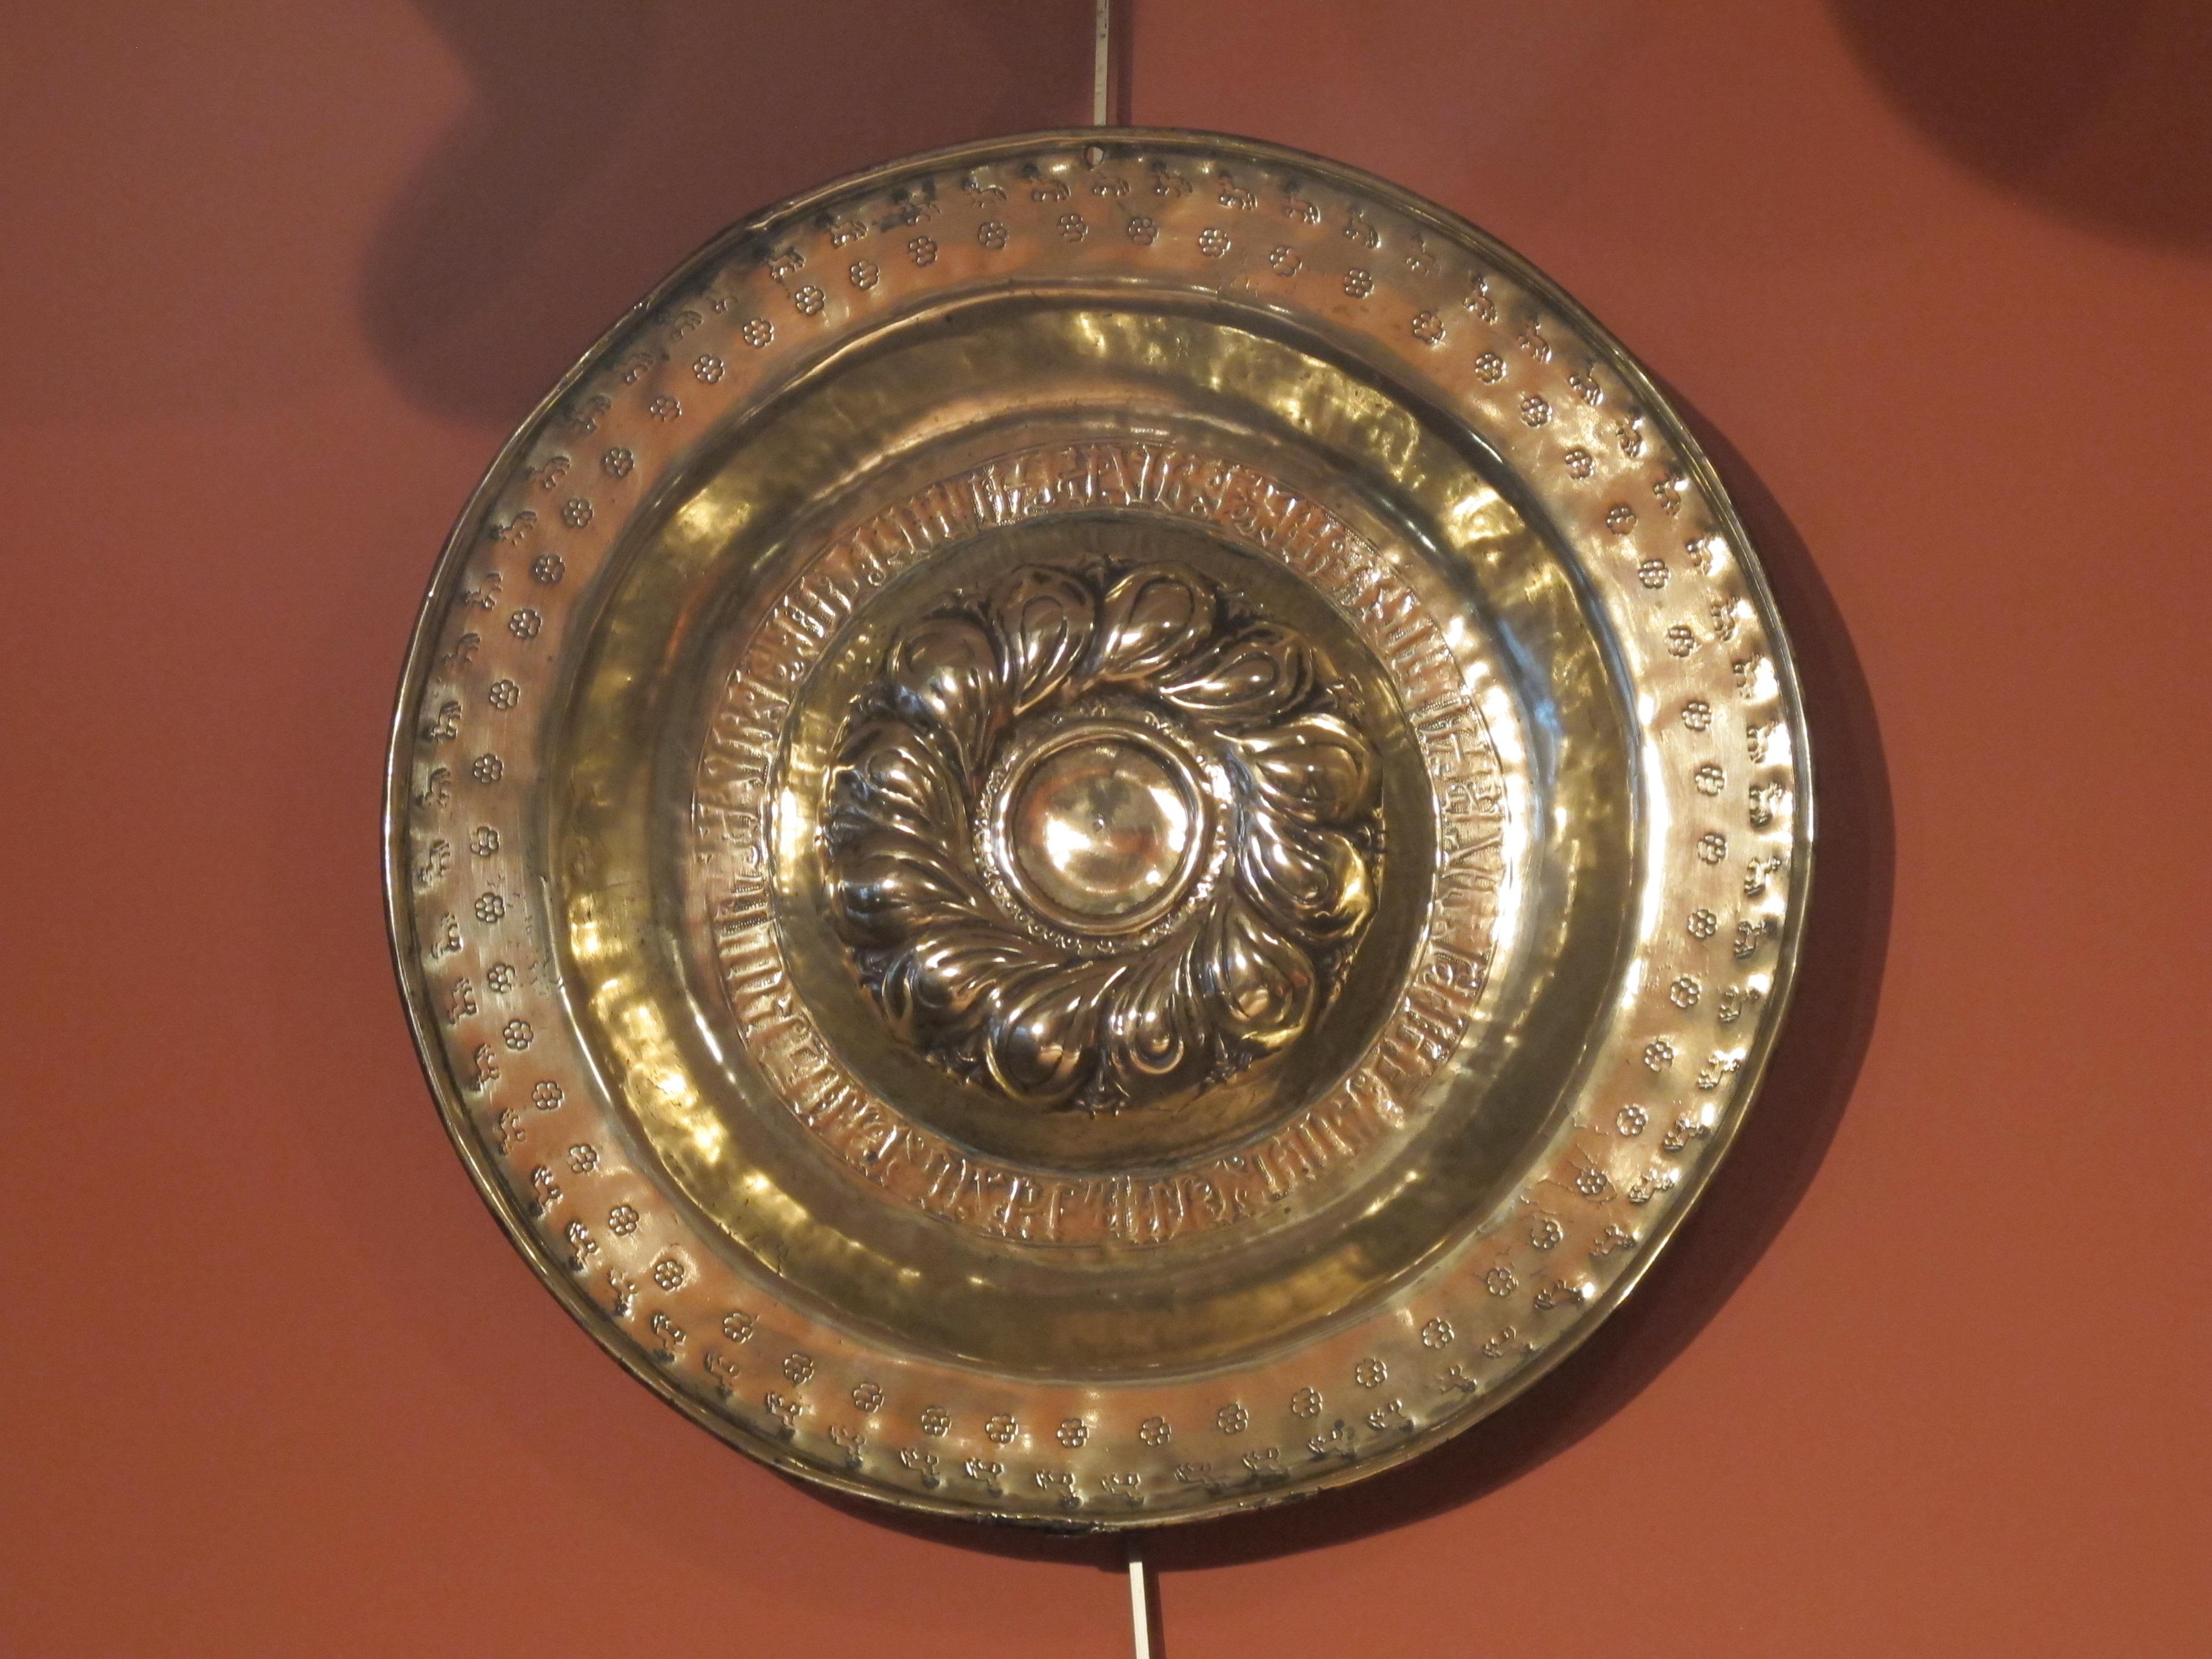 Origin: South Of Germany, Nuremberg
Period: Late 15th–early 16th century

Diameter 43.5 cm

Embossed and engraved brass

This is in Belgium, in the city of Dinant during the 12th and 13th centuries, that the ‘copper beaters’ corporation